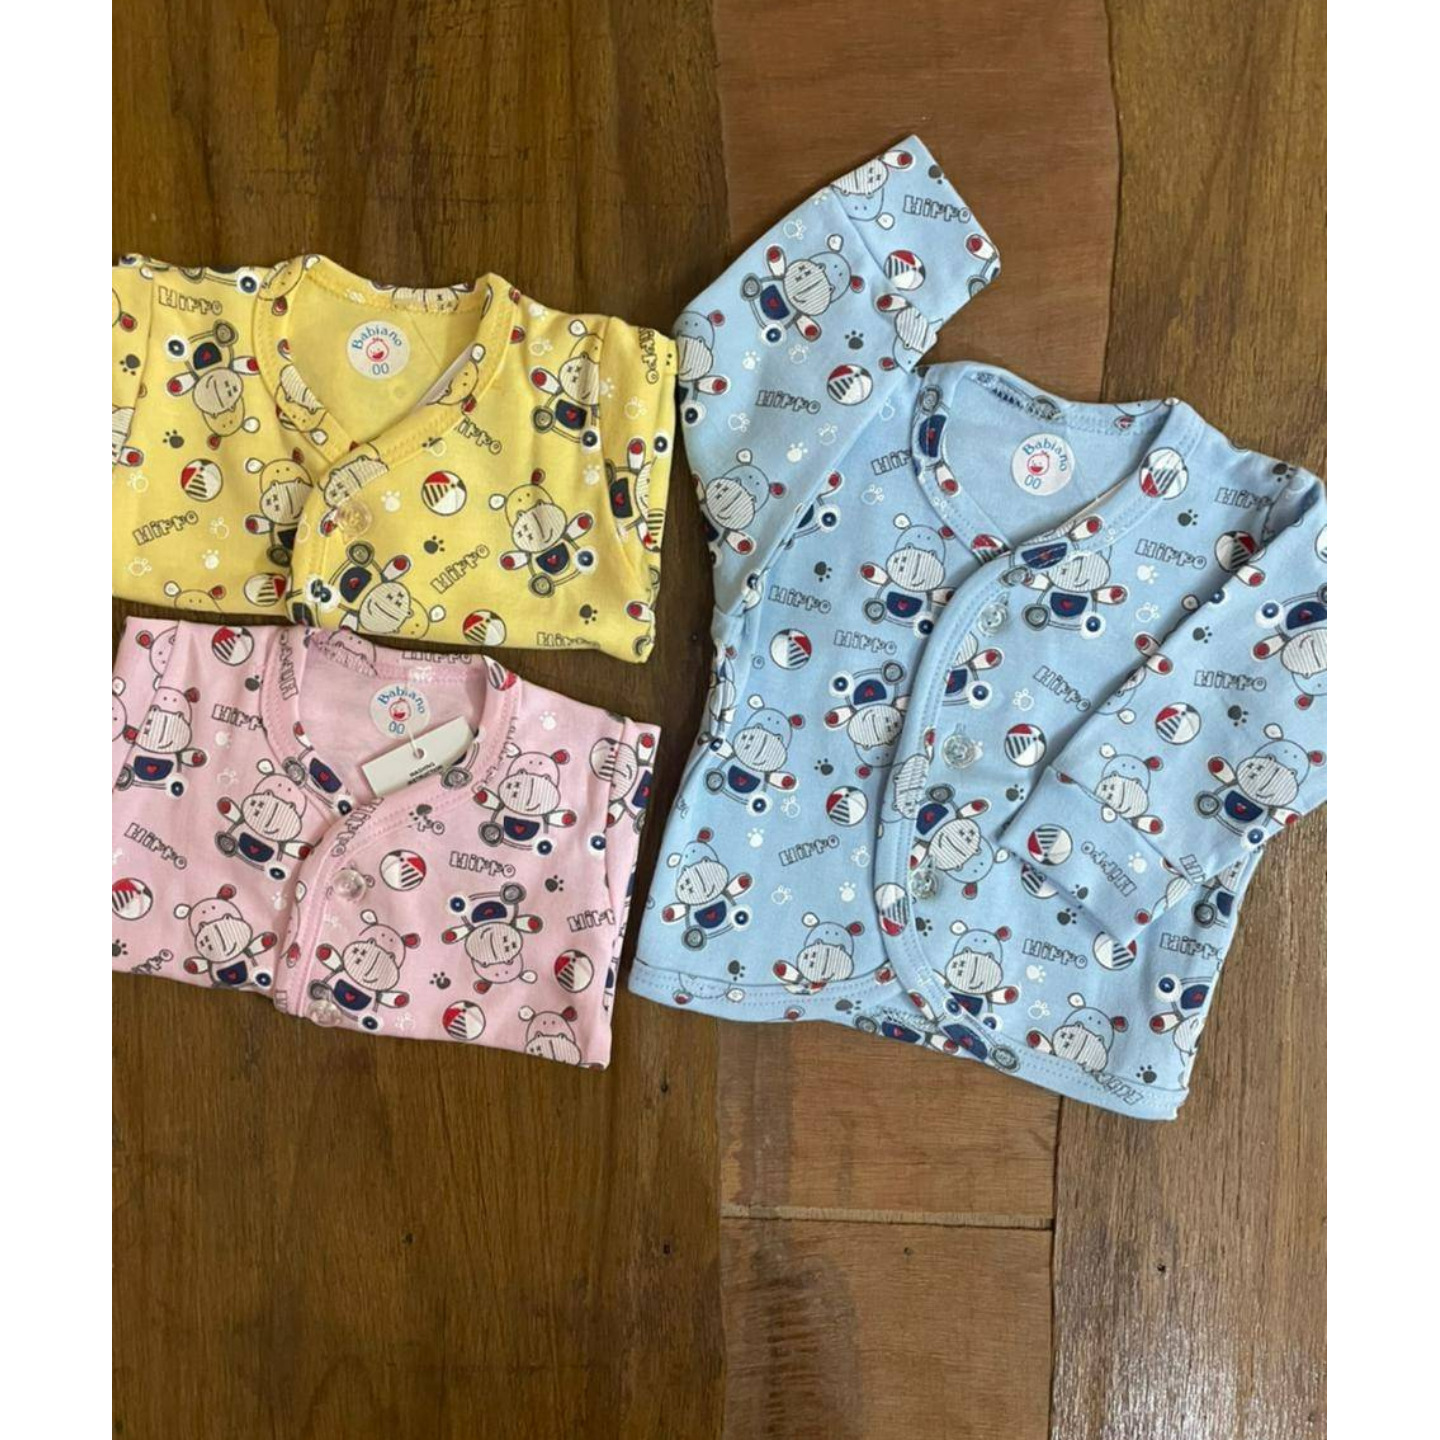 Babiano Full Sleeve Tops Pack of 3 Rs 495 Only New Born Size